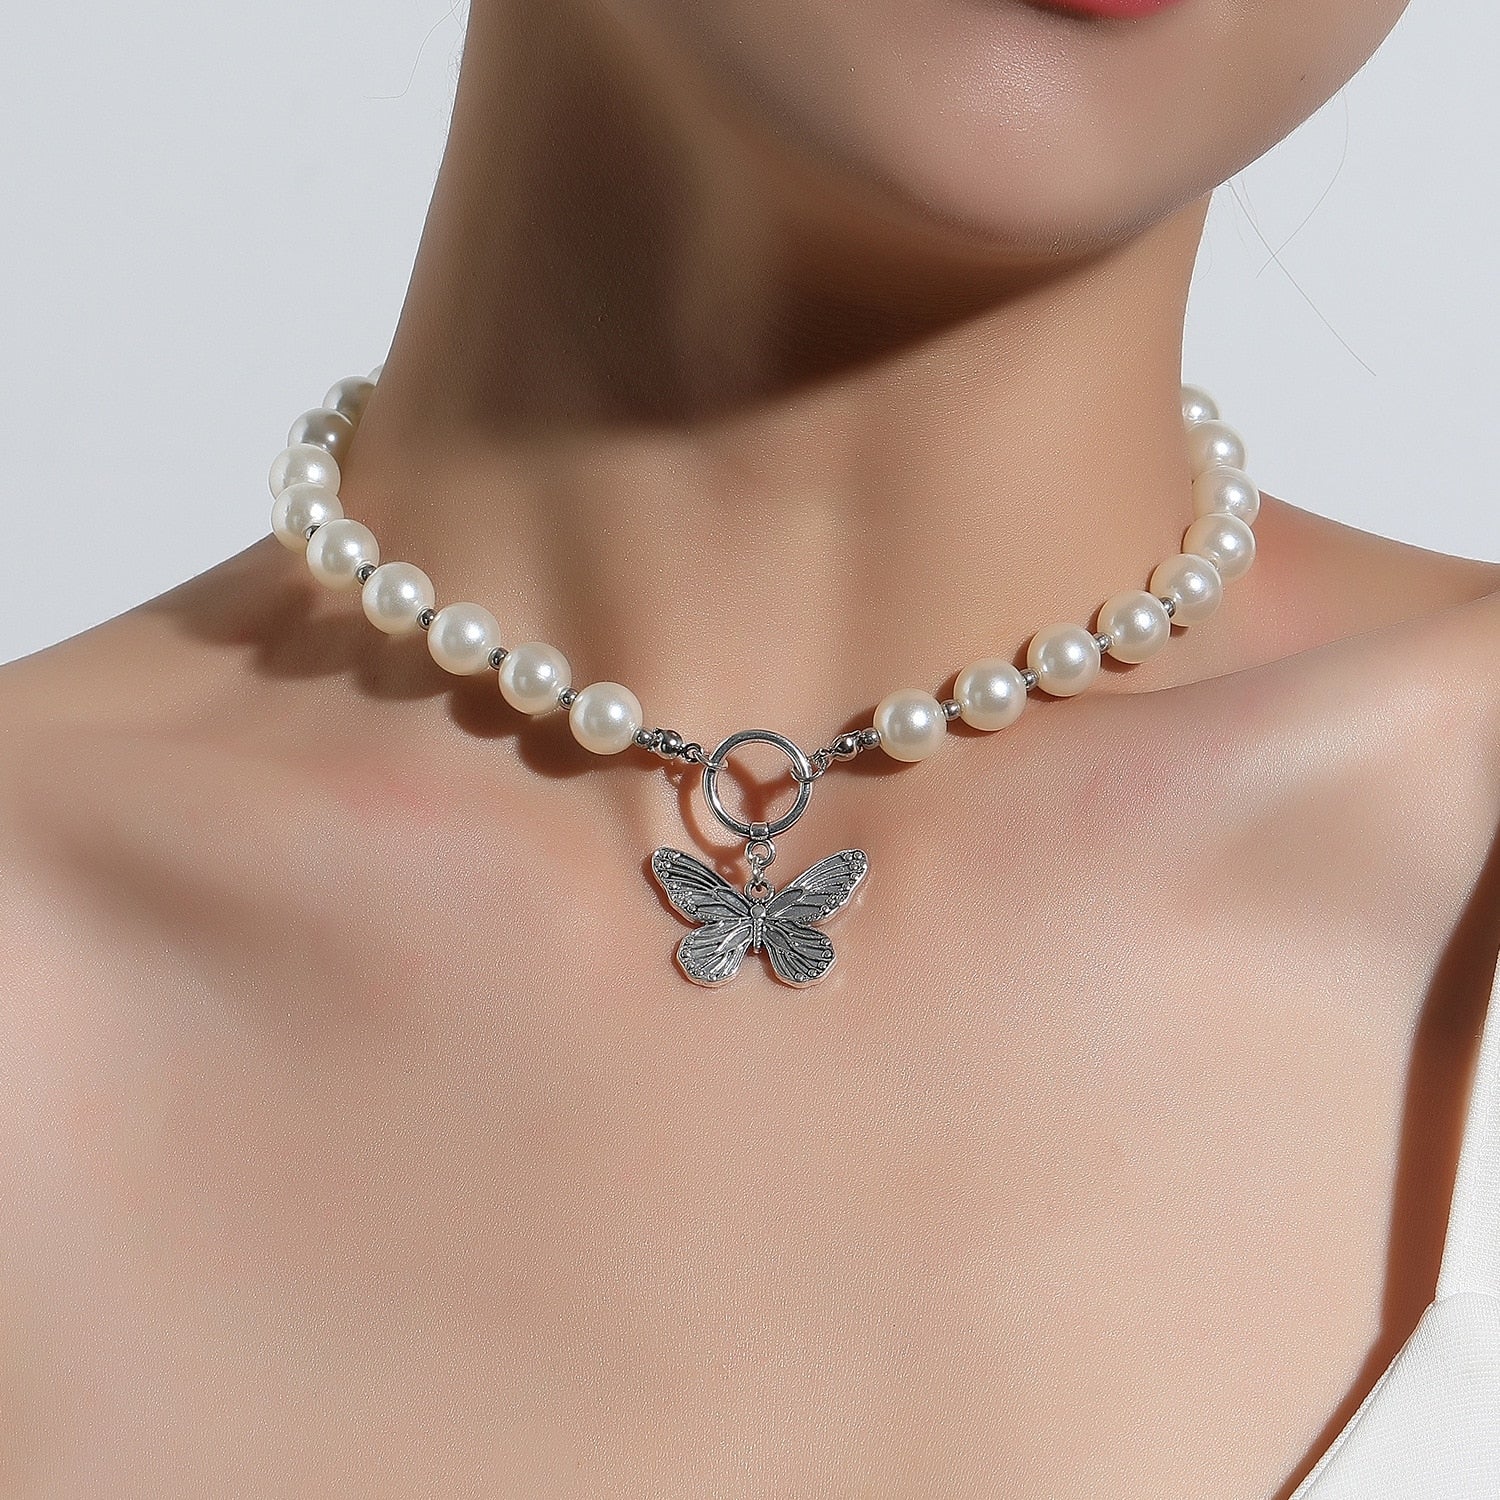 Antique Pearl Chain Necklace With Butterfly Pendant